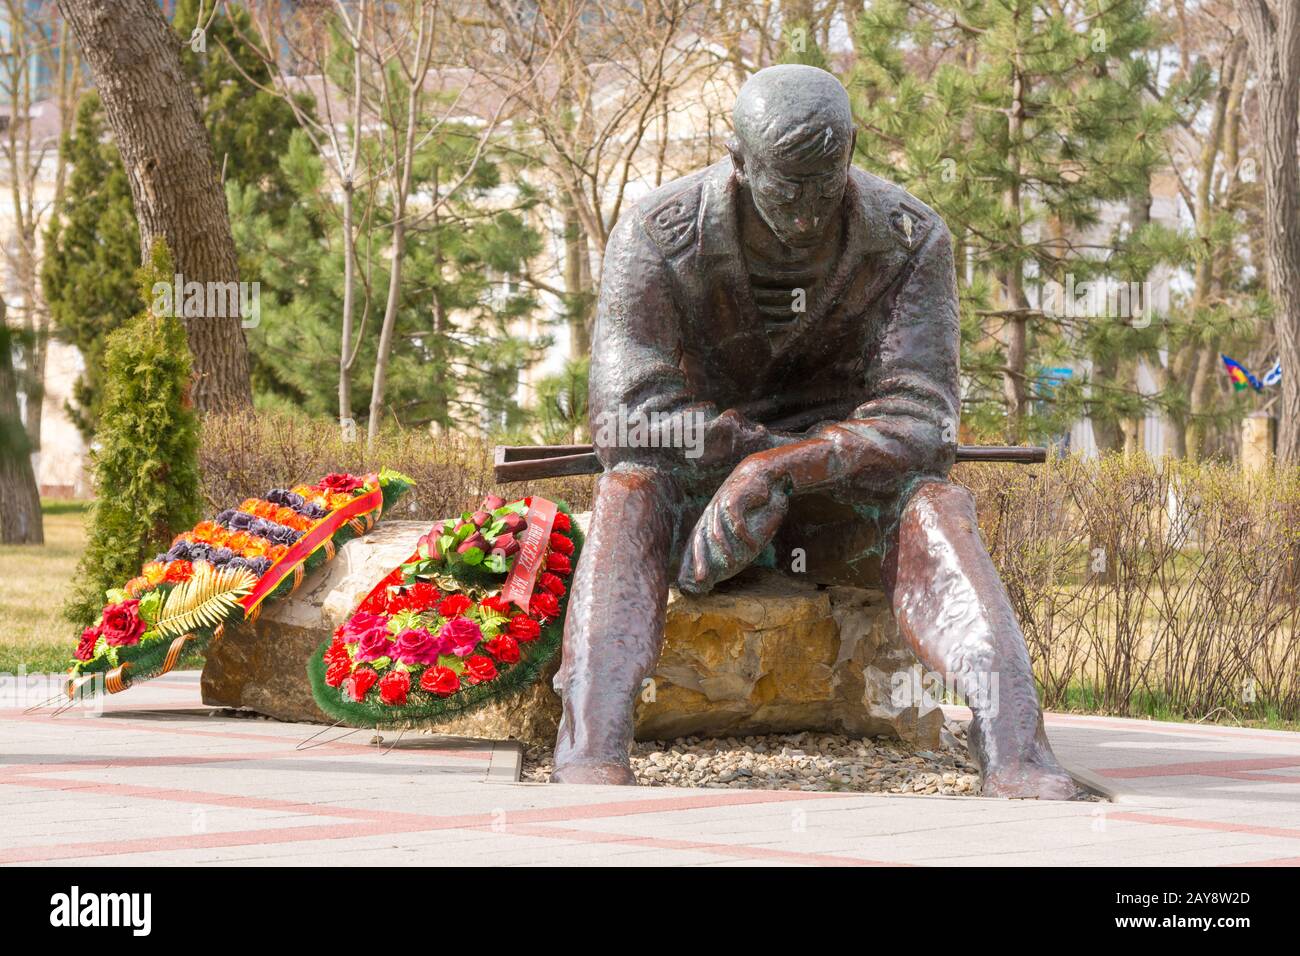 Аnapa, Russia - March 5, 2016: Memorial dedicated to the wars of the Afghans, in the Memory Park and Alley of Glory in Anapa, R Stock Photo